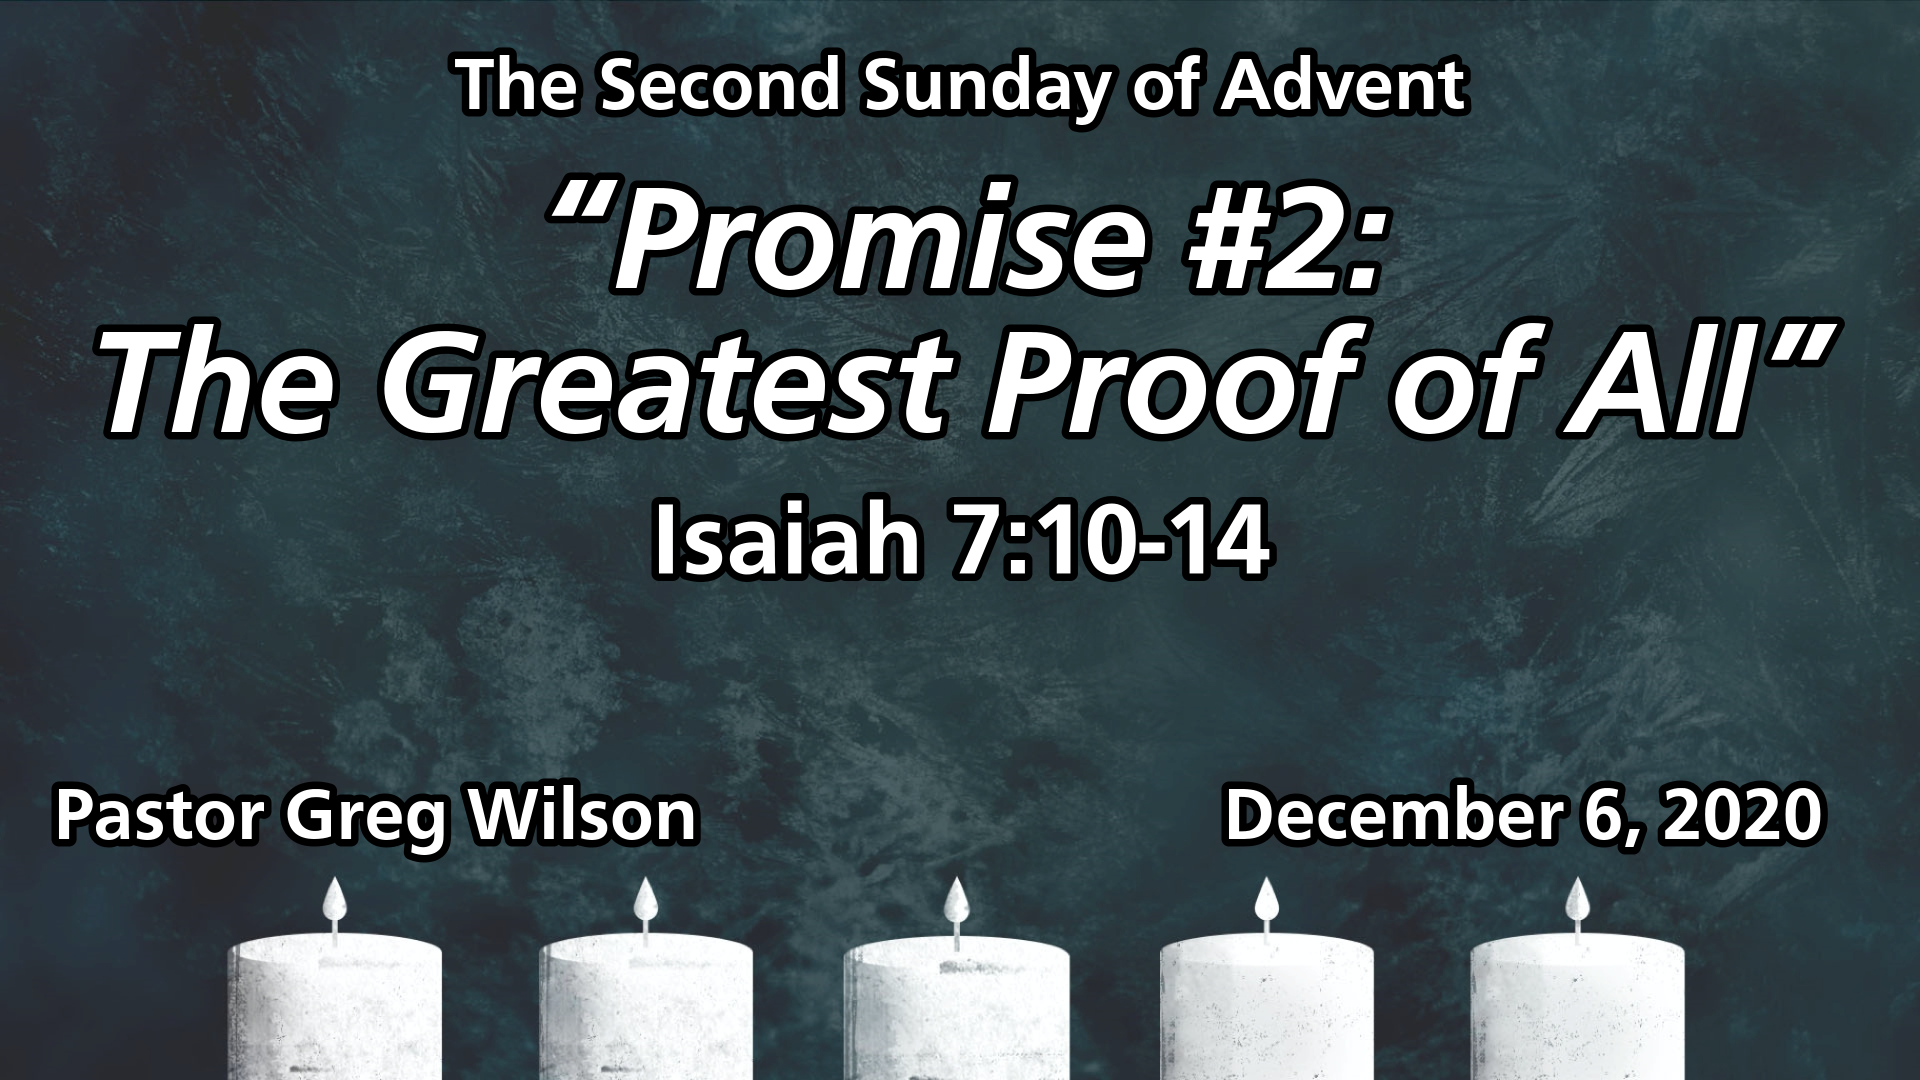 “Promise #2: The Greatest Proof of All”